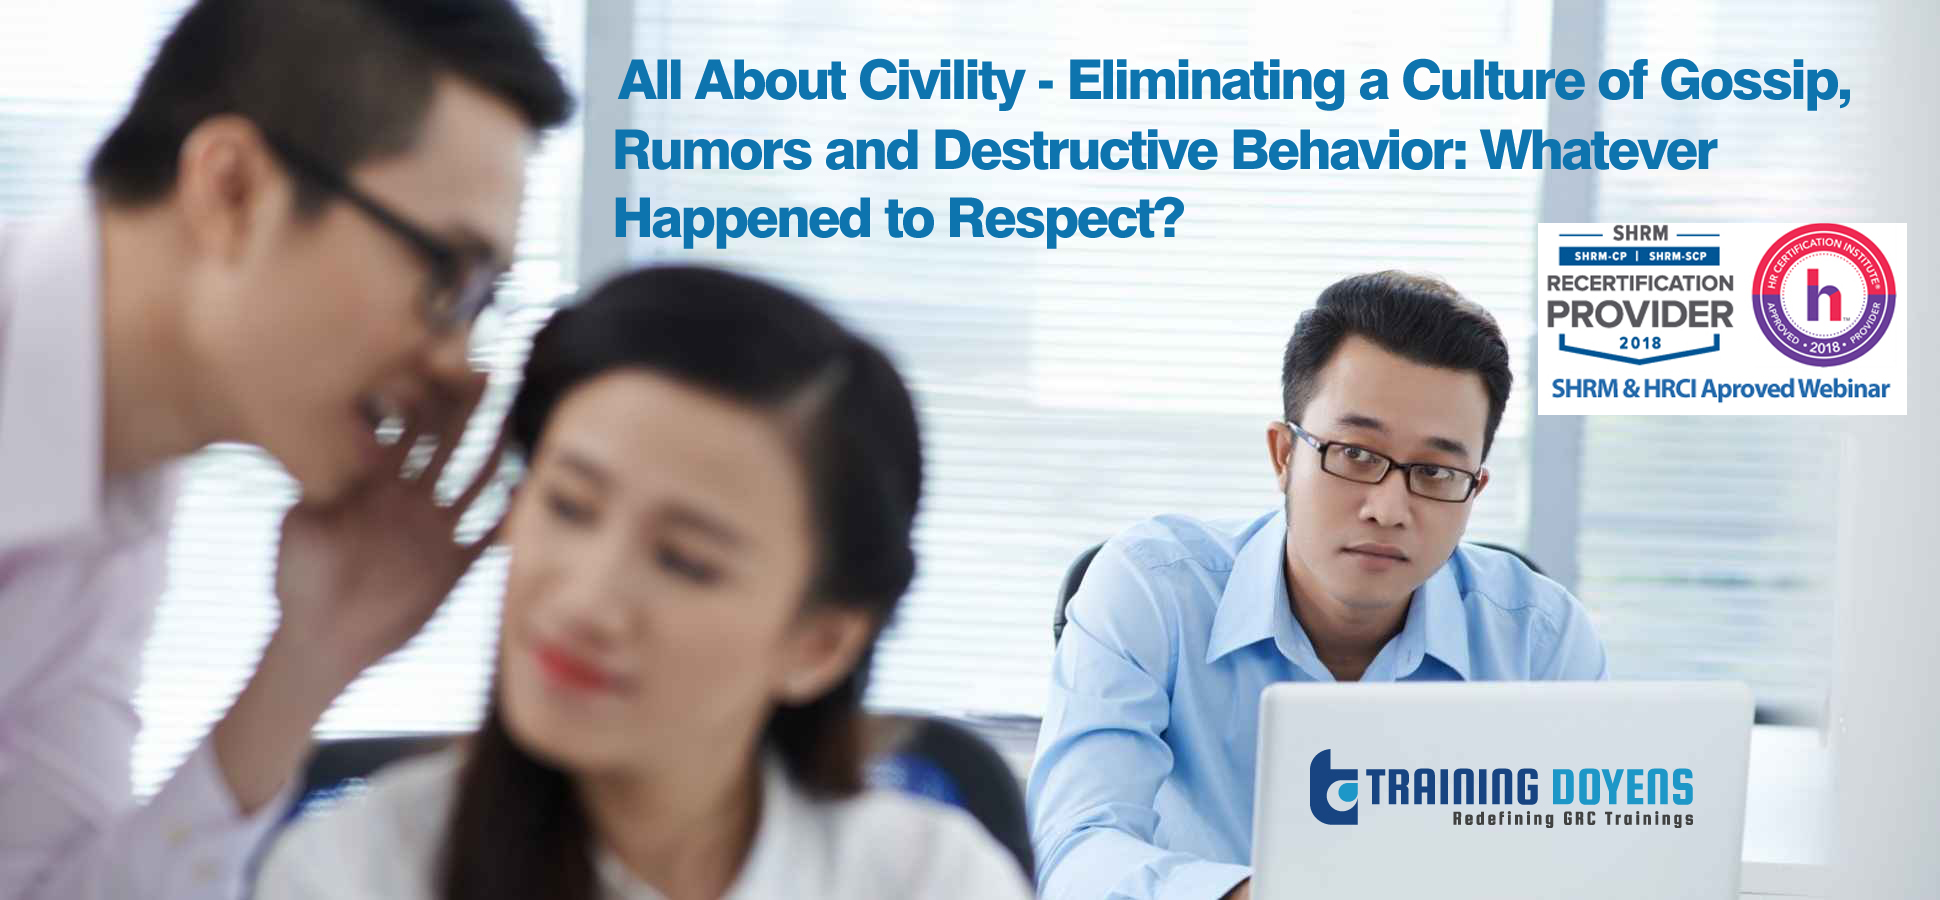 Live Webinar on All About Civility - Eliminating a Culture of Gossip, Rumors and Destructive Behavior: Whatever Happened to Respect? – Training Doyens, Denver, Colorado, United States